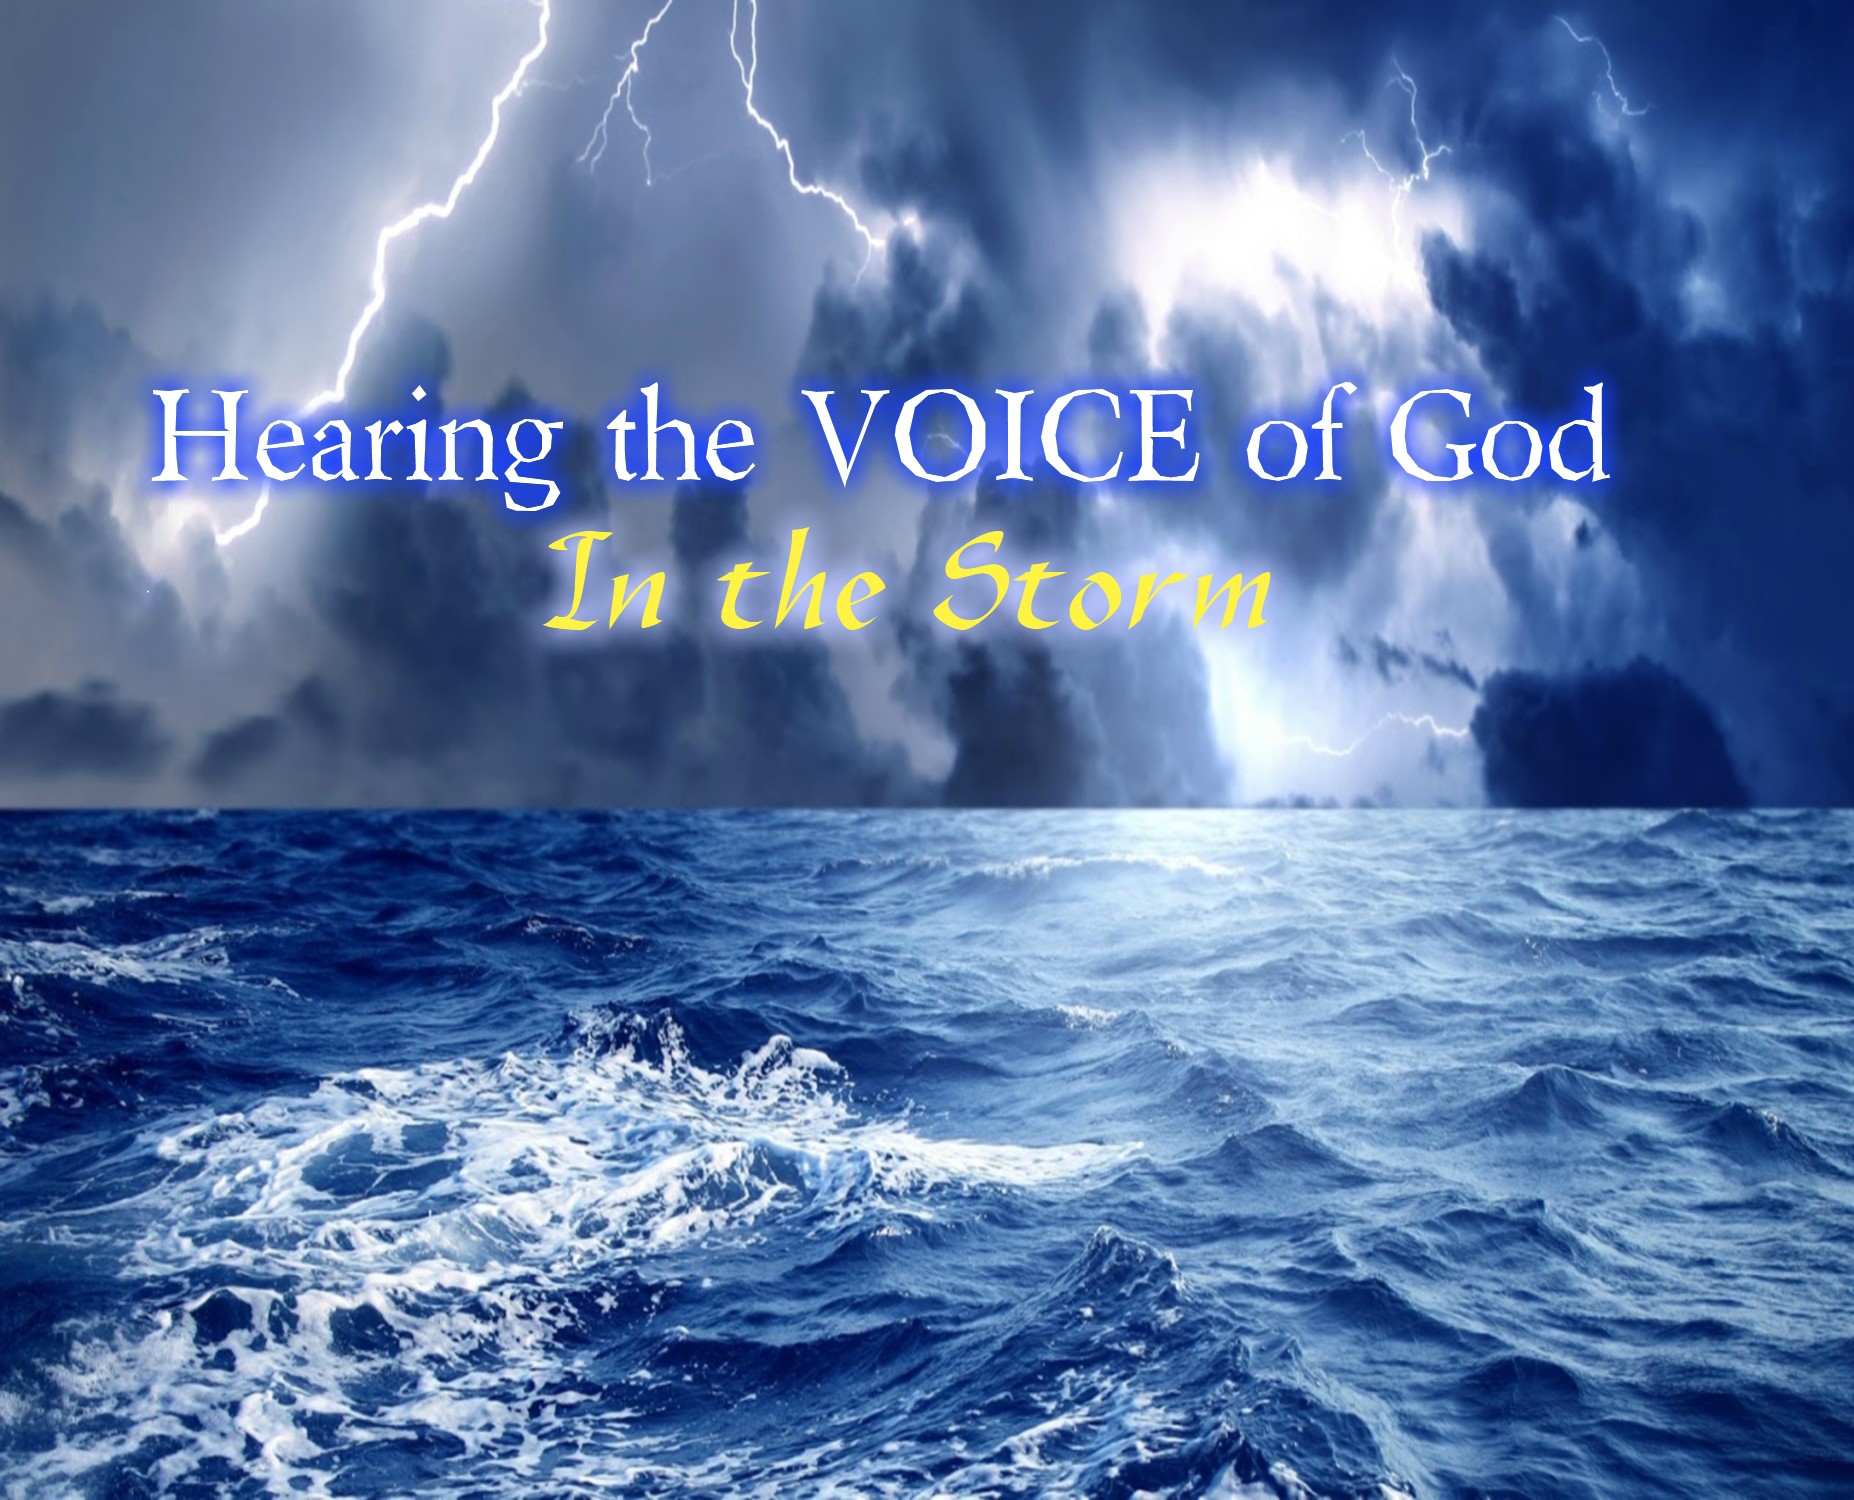 HEARING THE VOICE OF GOD IN THE STORM (MARK 4:35-41)